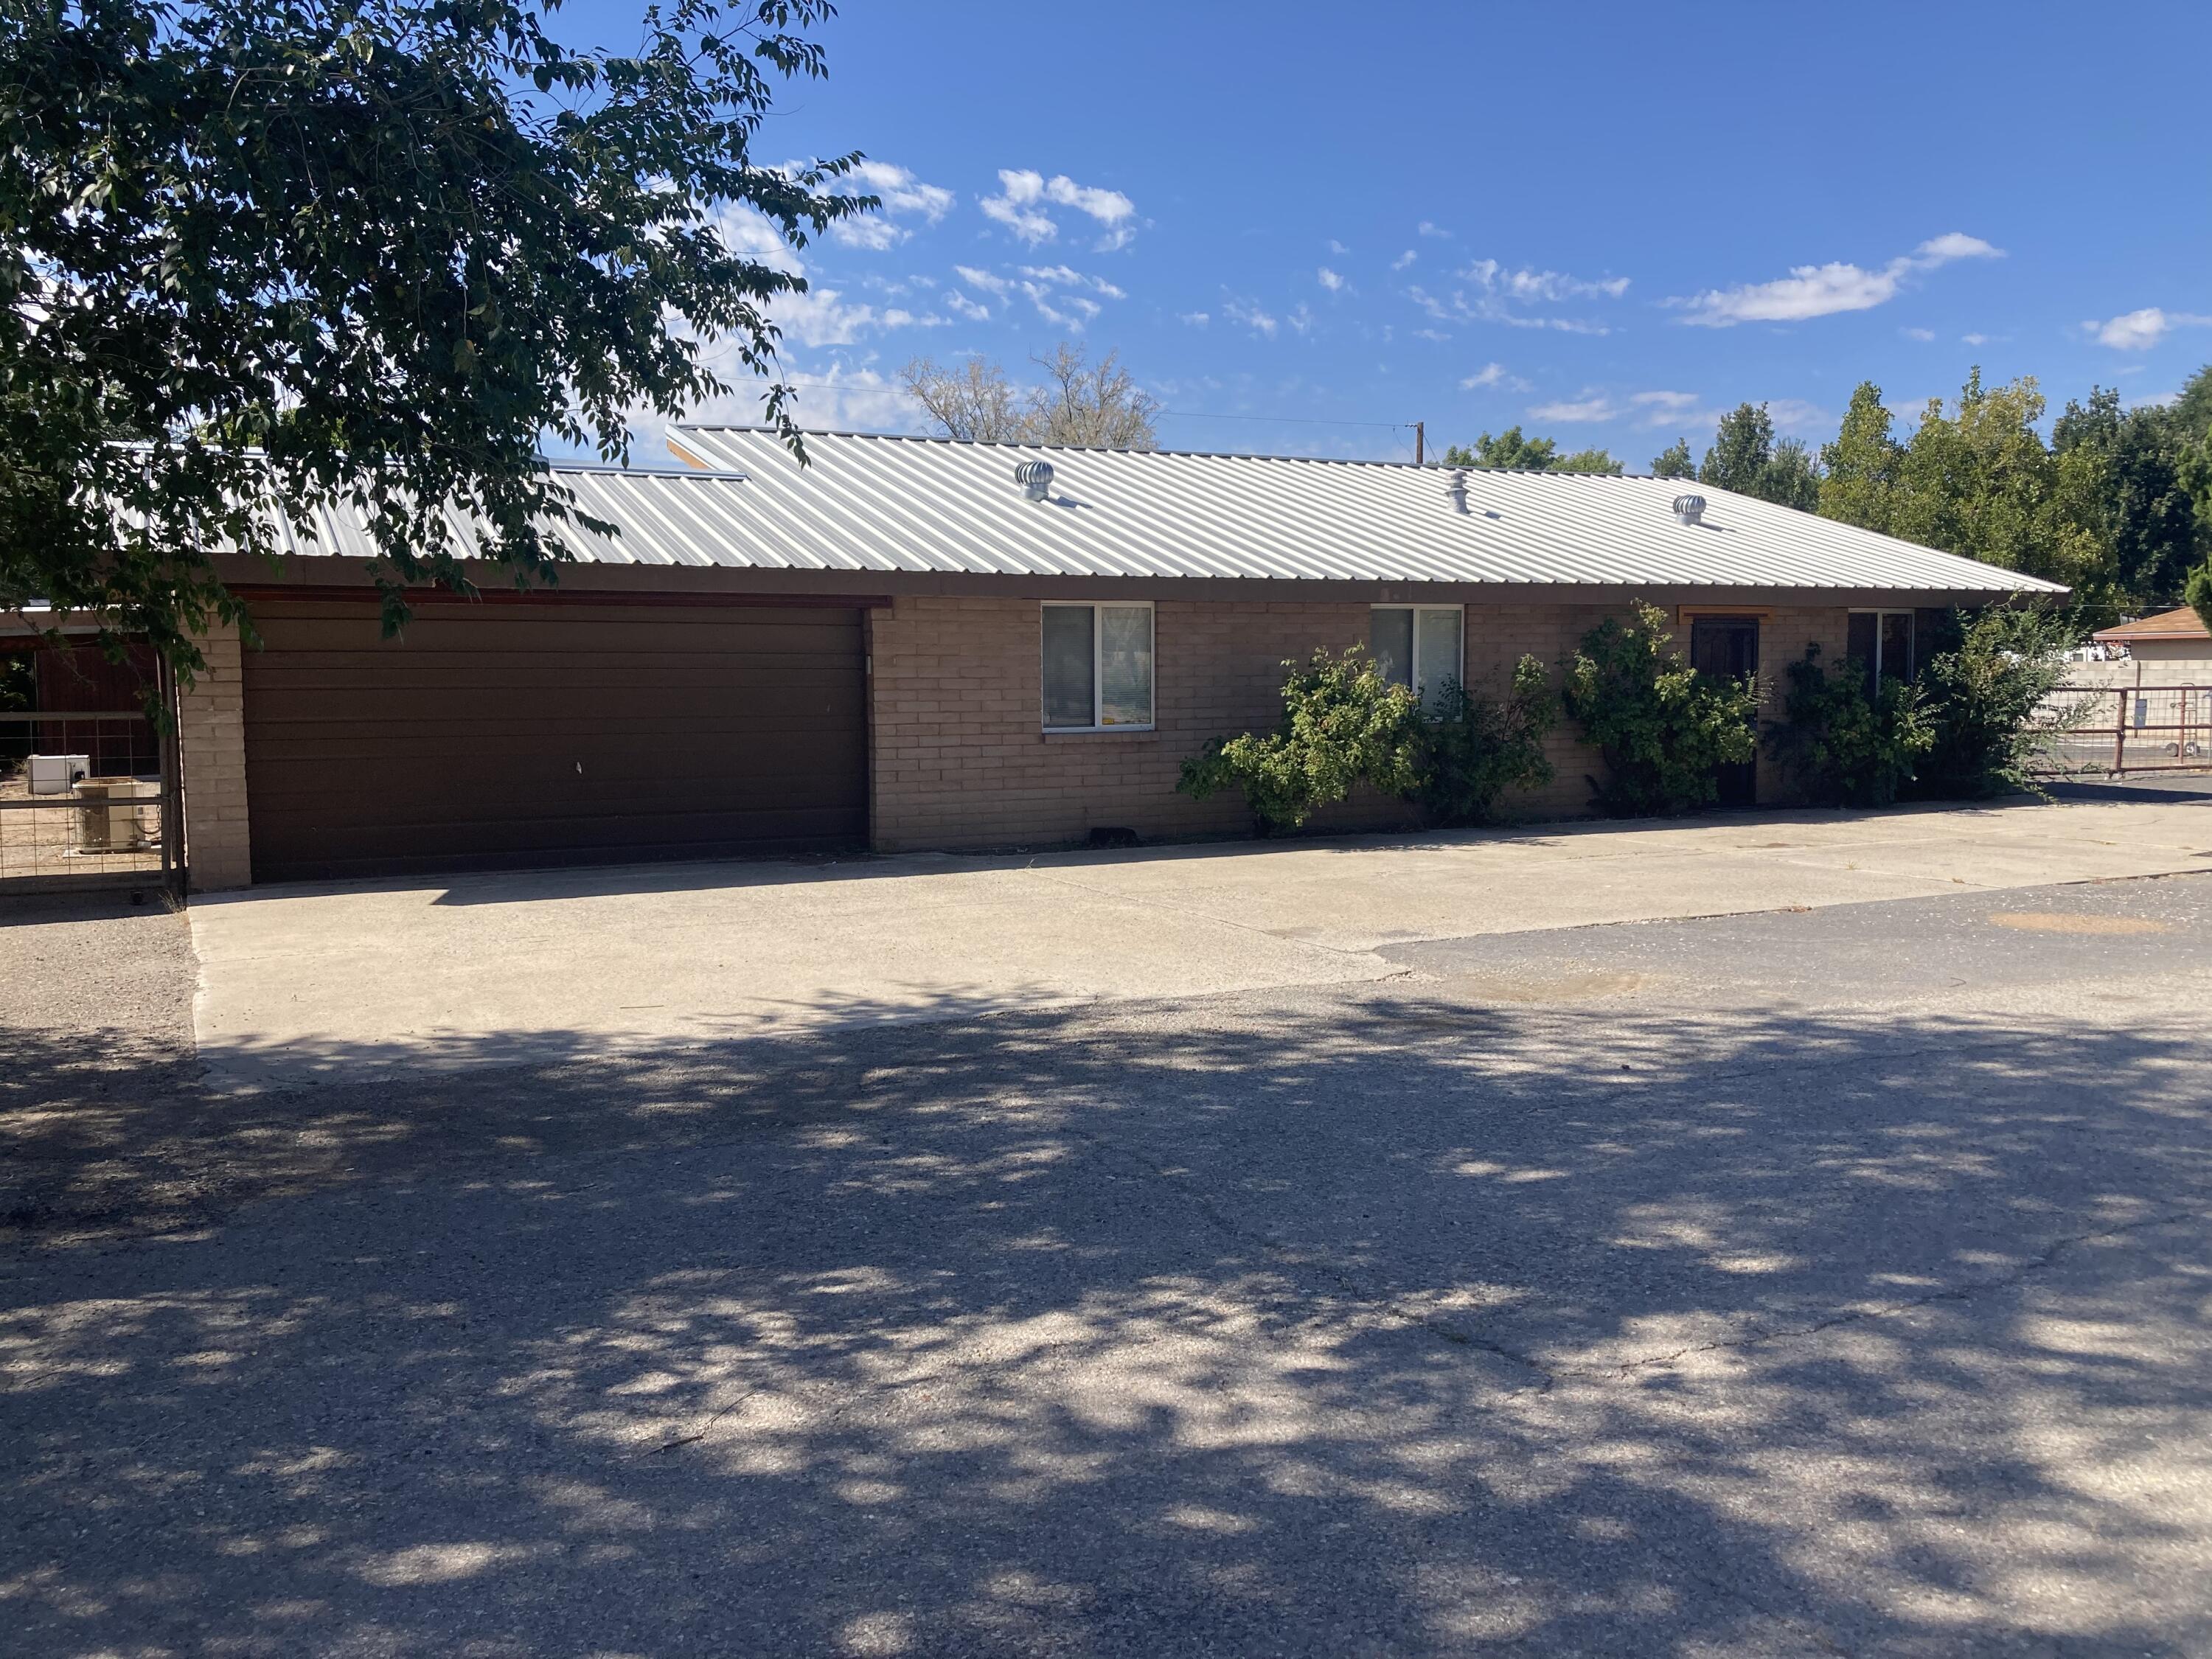 Great property with large fenced in yard. Beautiful wood beams with open concept. Cute horse barn with stalls.  2 horses allowed. Spacious tack room/storage/workspace. Plenty of room for parking large trailers. Nice back porch with lots of room to entertain.